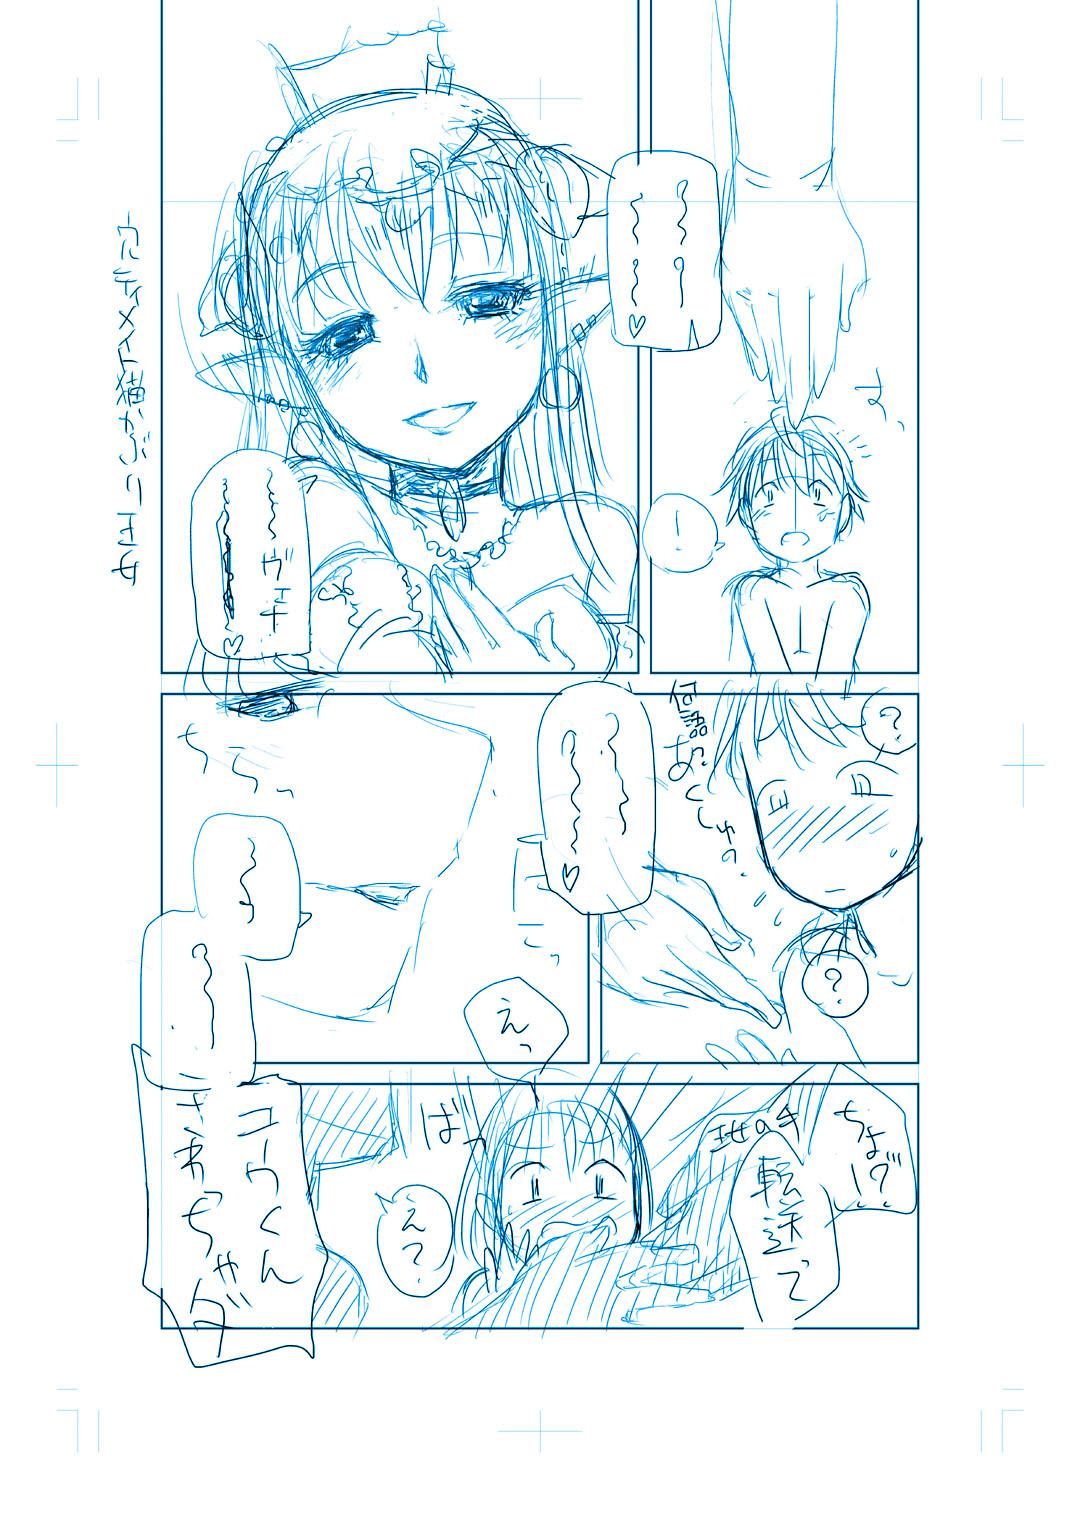 Funny [Iwaman] 商業連載用ネーム「王女と彼女の十月十日」供養(ヽ´ω`)人 - Original Jerkoff - Page 11